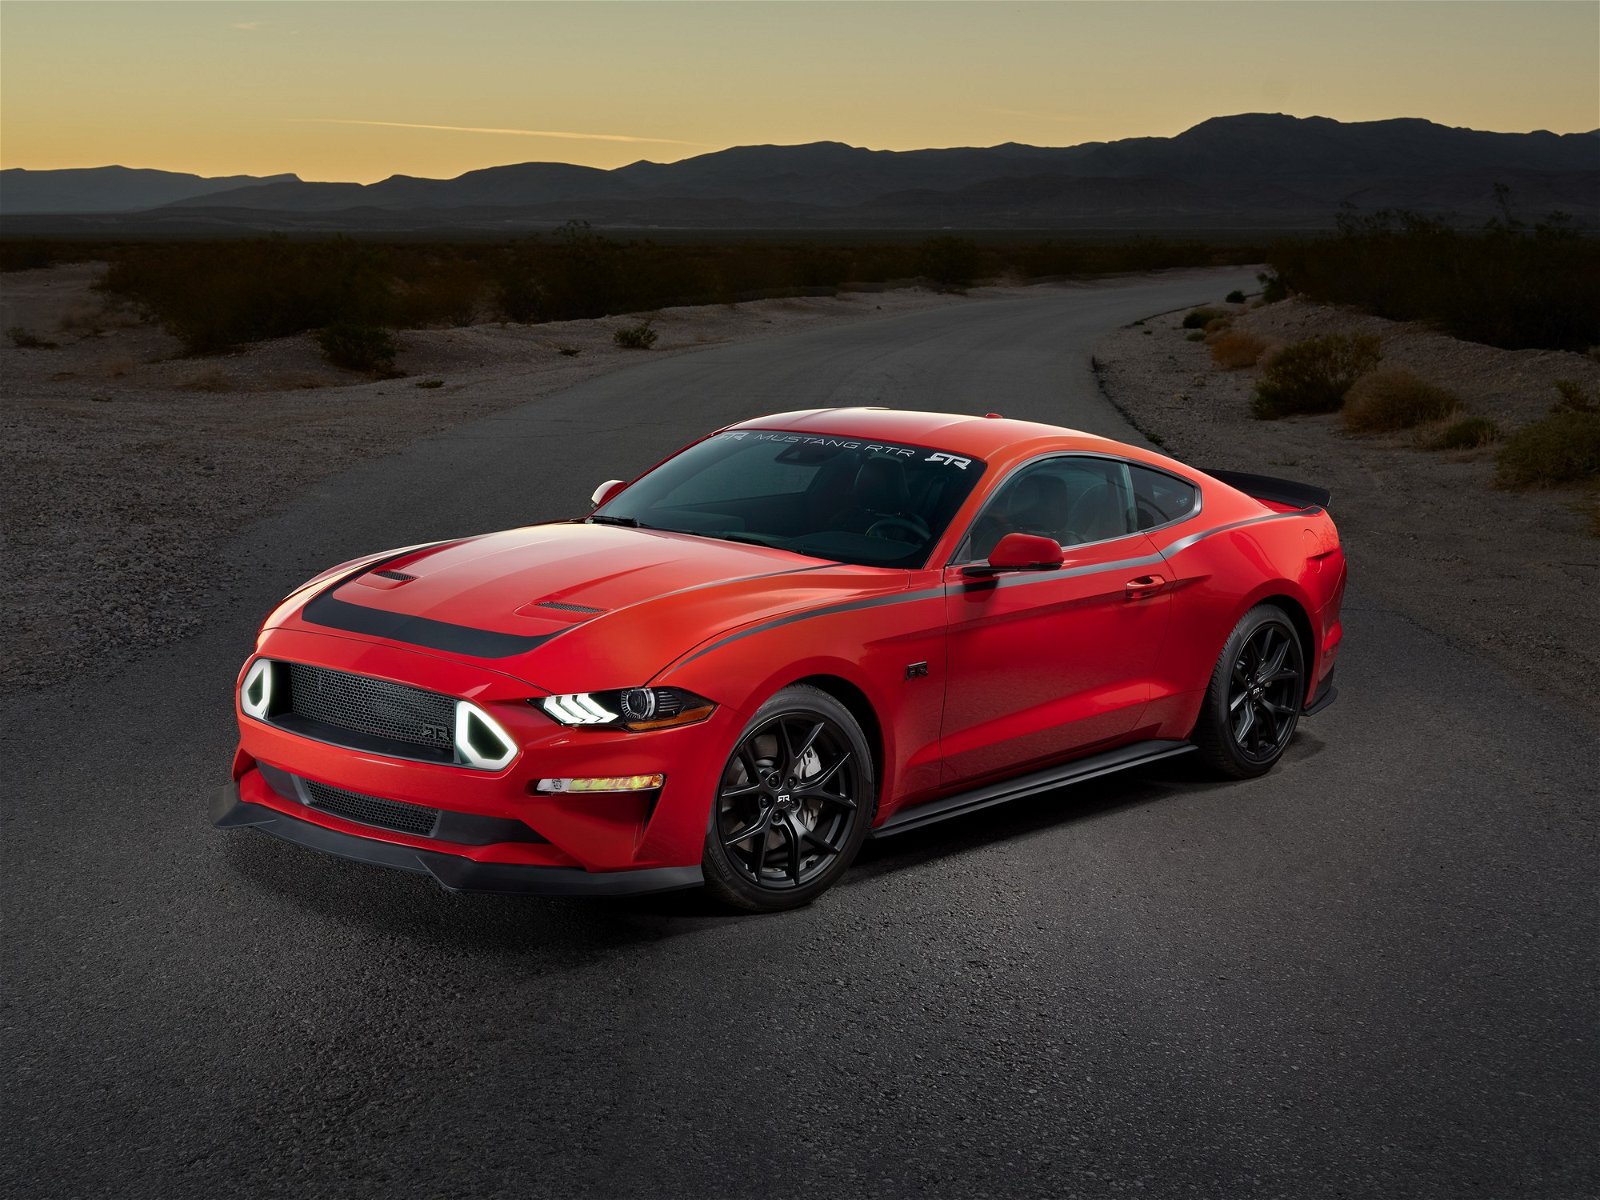 series-1-ford-mustang-rtr-6